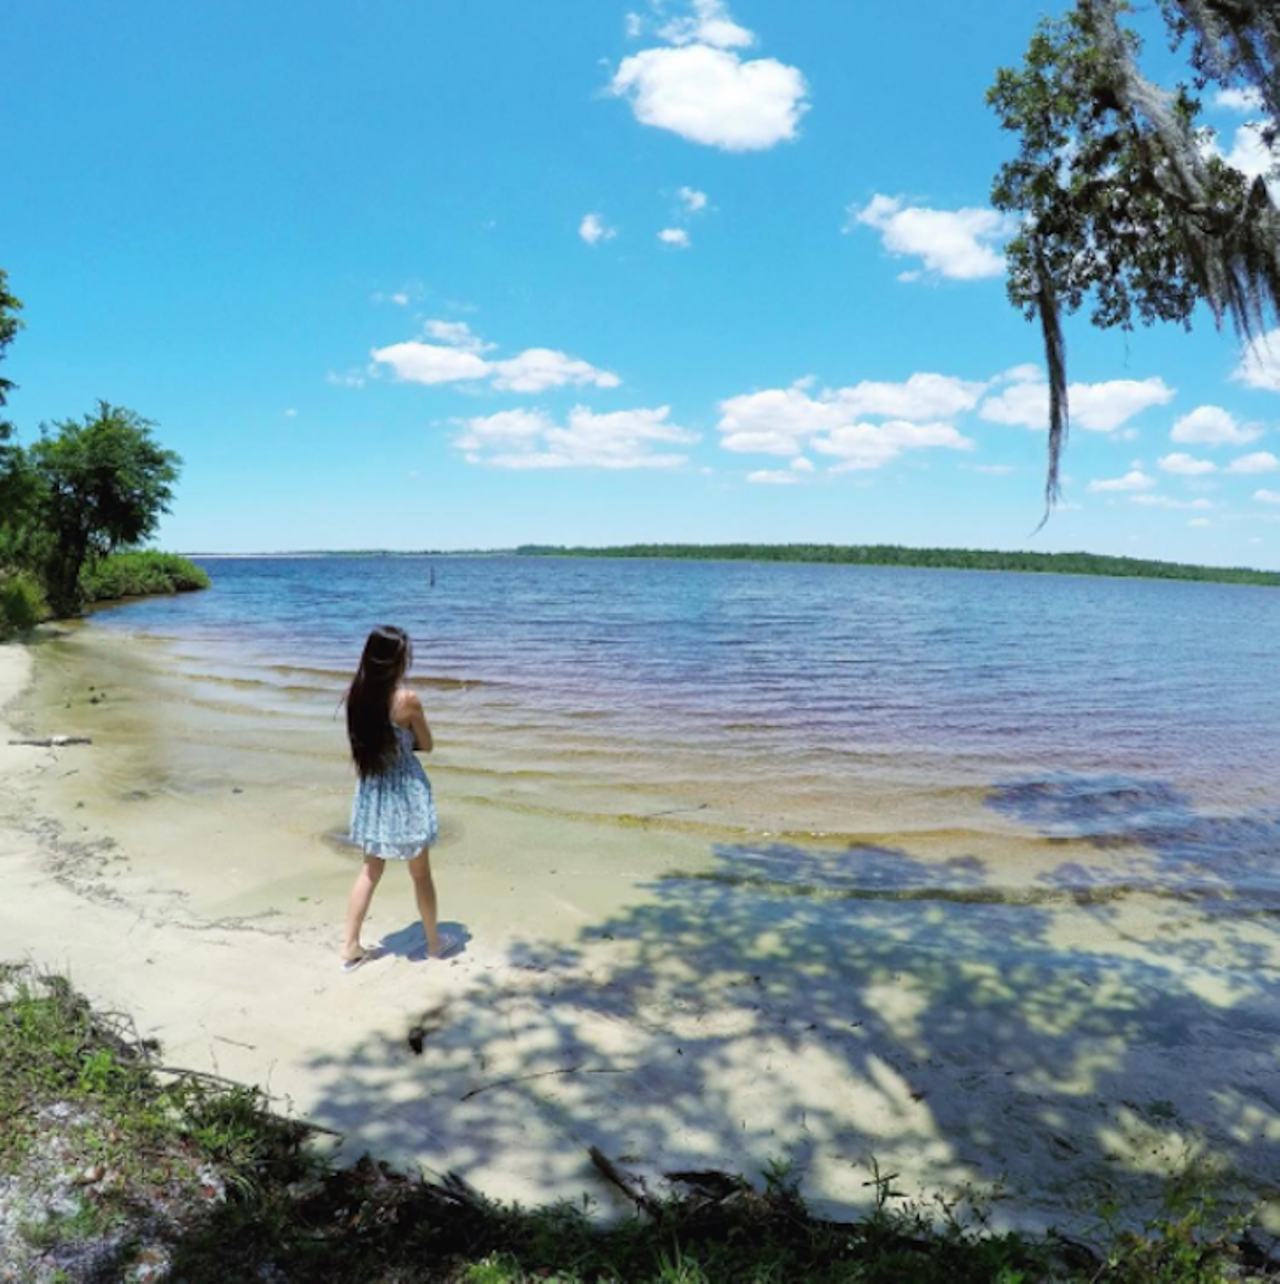 Lake Manatee State Park
Distance from Orlando: 2 hours
Fifteen miles east of Bradenton, freshwater fishing and a swimming beach attract daily visitors to this park where, contrary to the name, you can&#146;t actually see manatees.
Photo via babbyprincess/Instagram